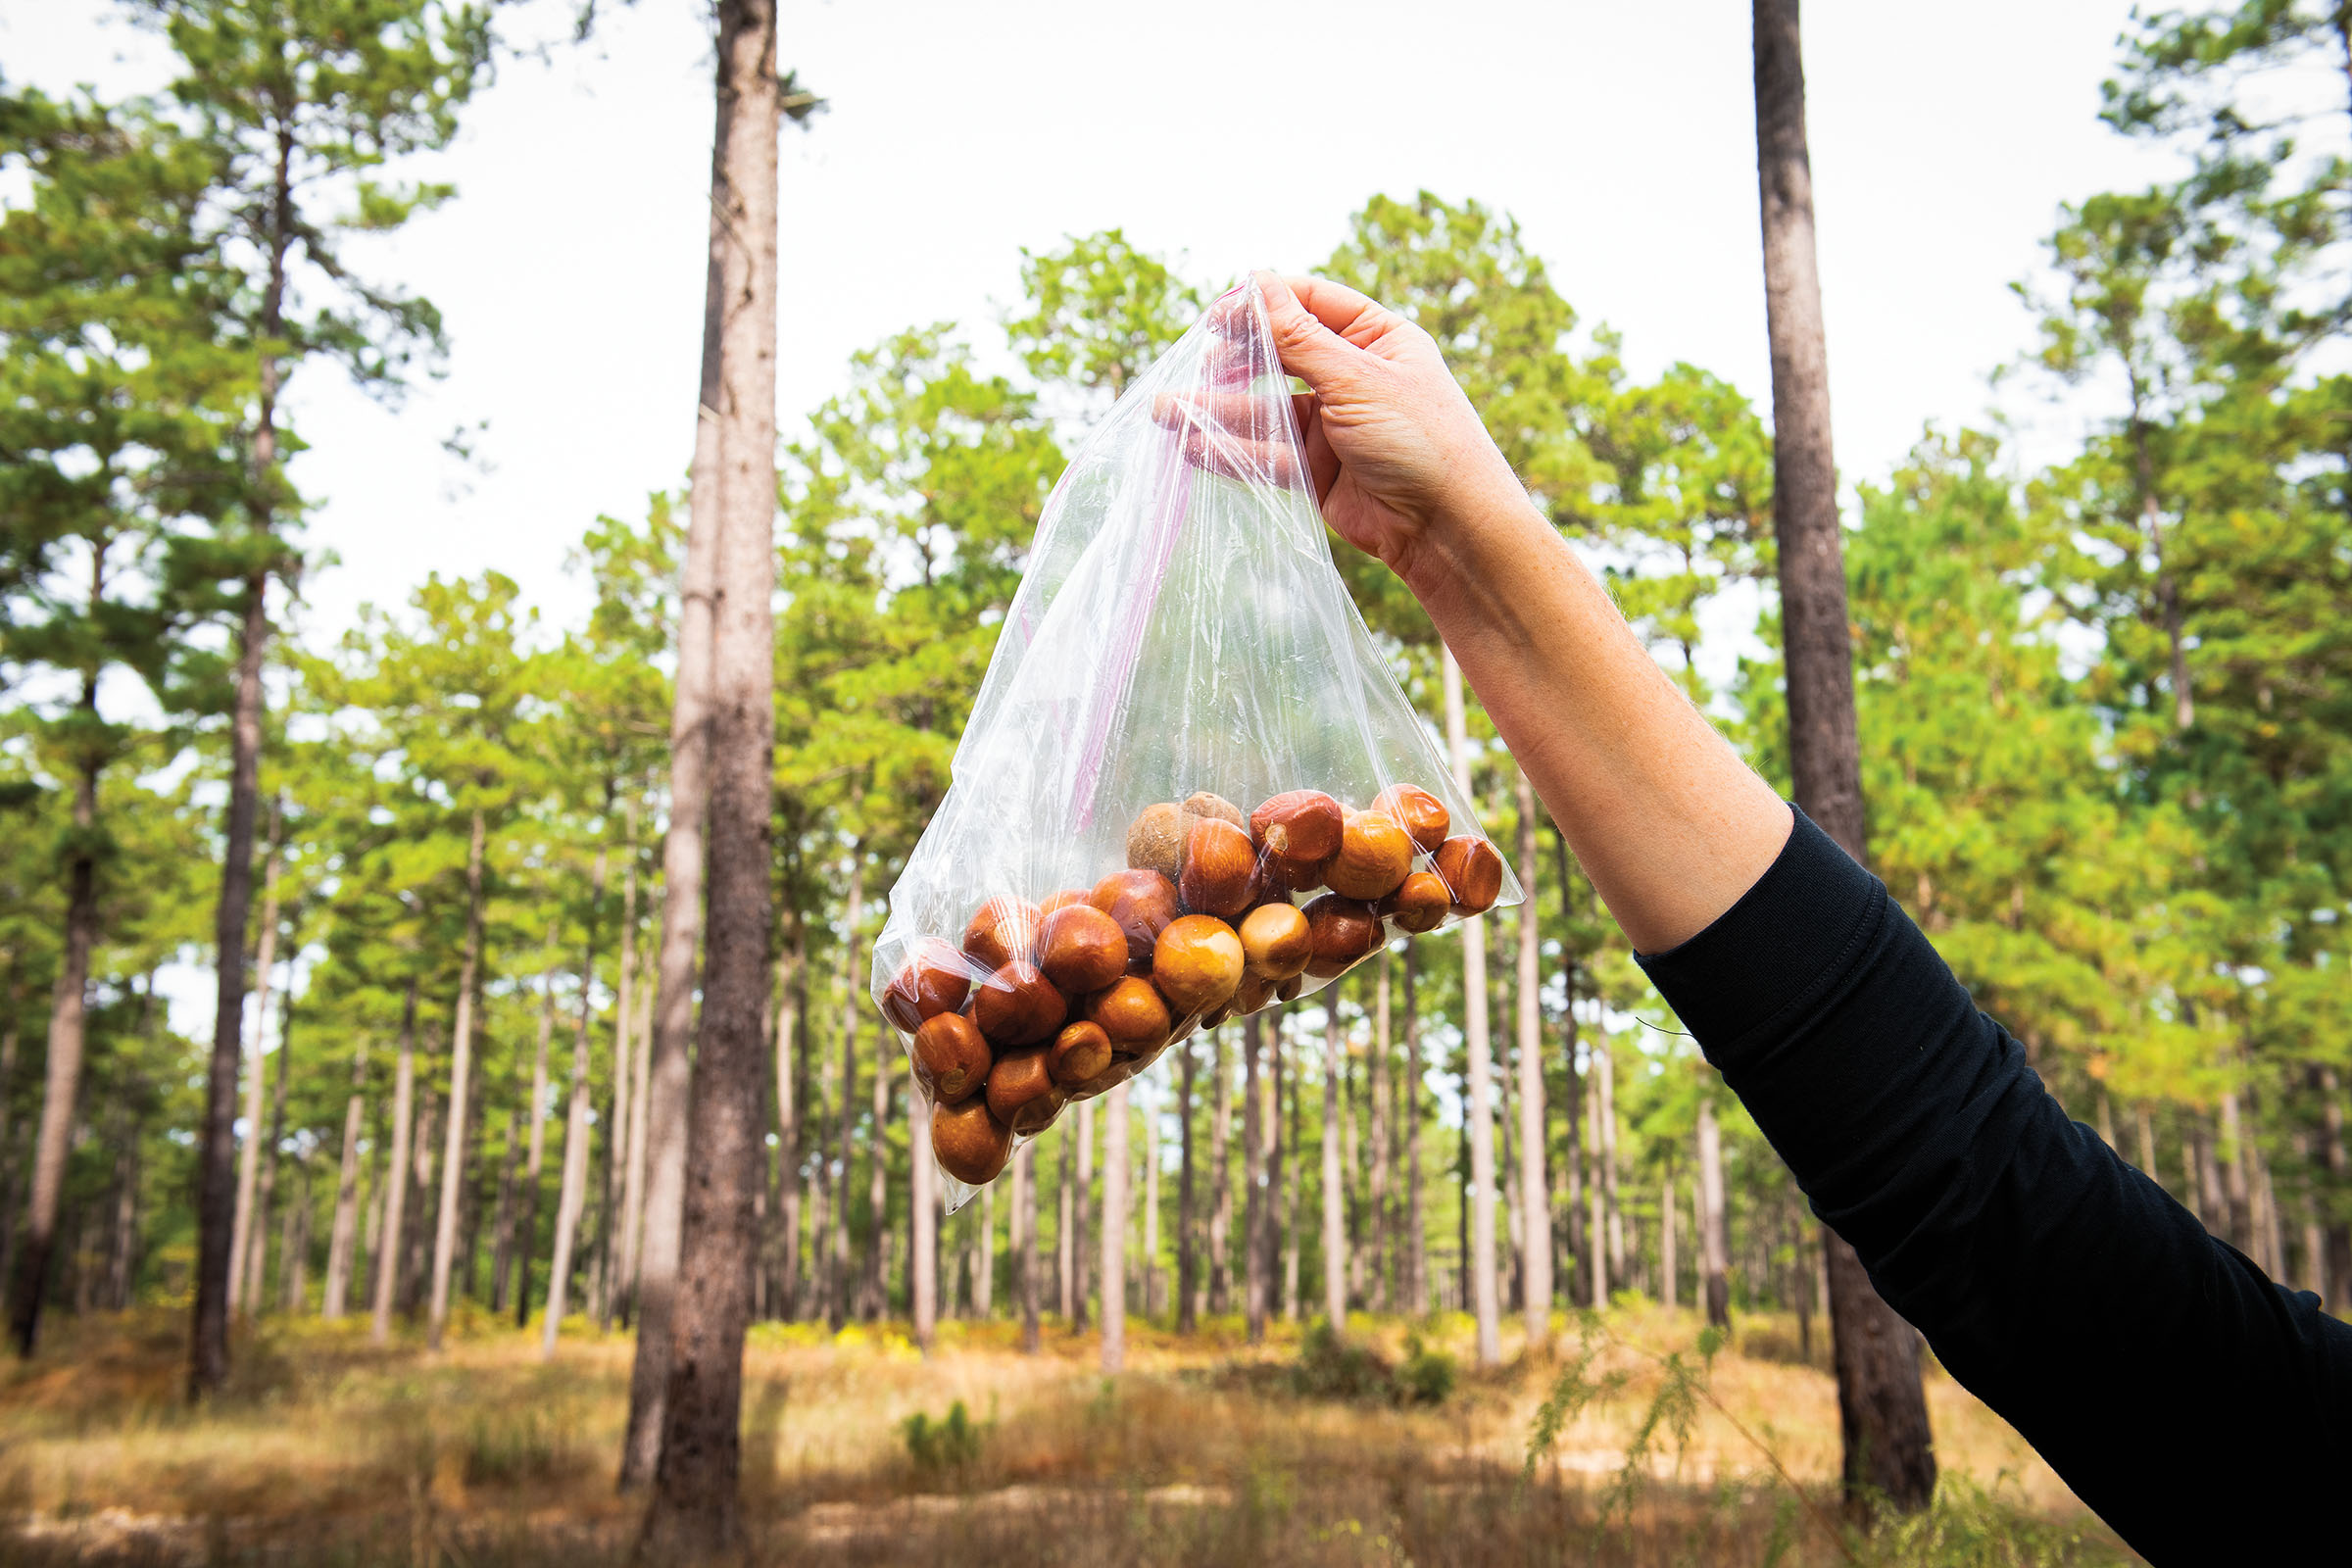 A hand holds up a plastic bag filled with large reddish-brown seeds on a wooded background